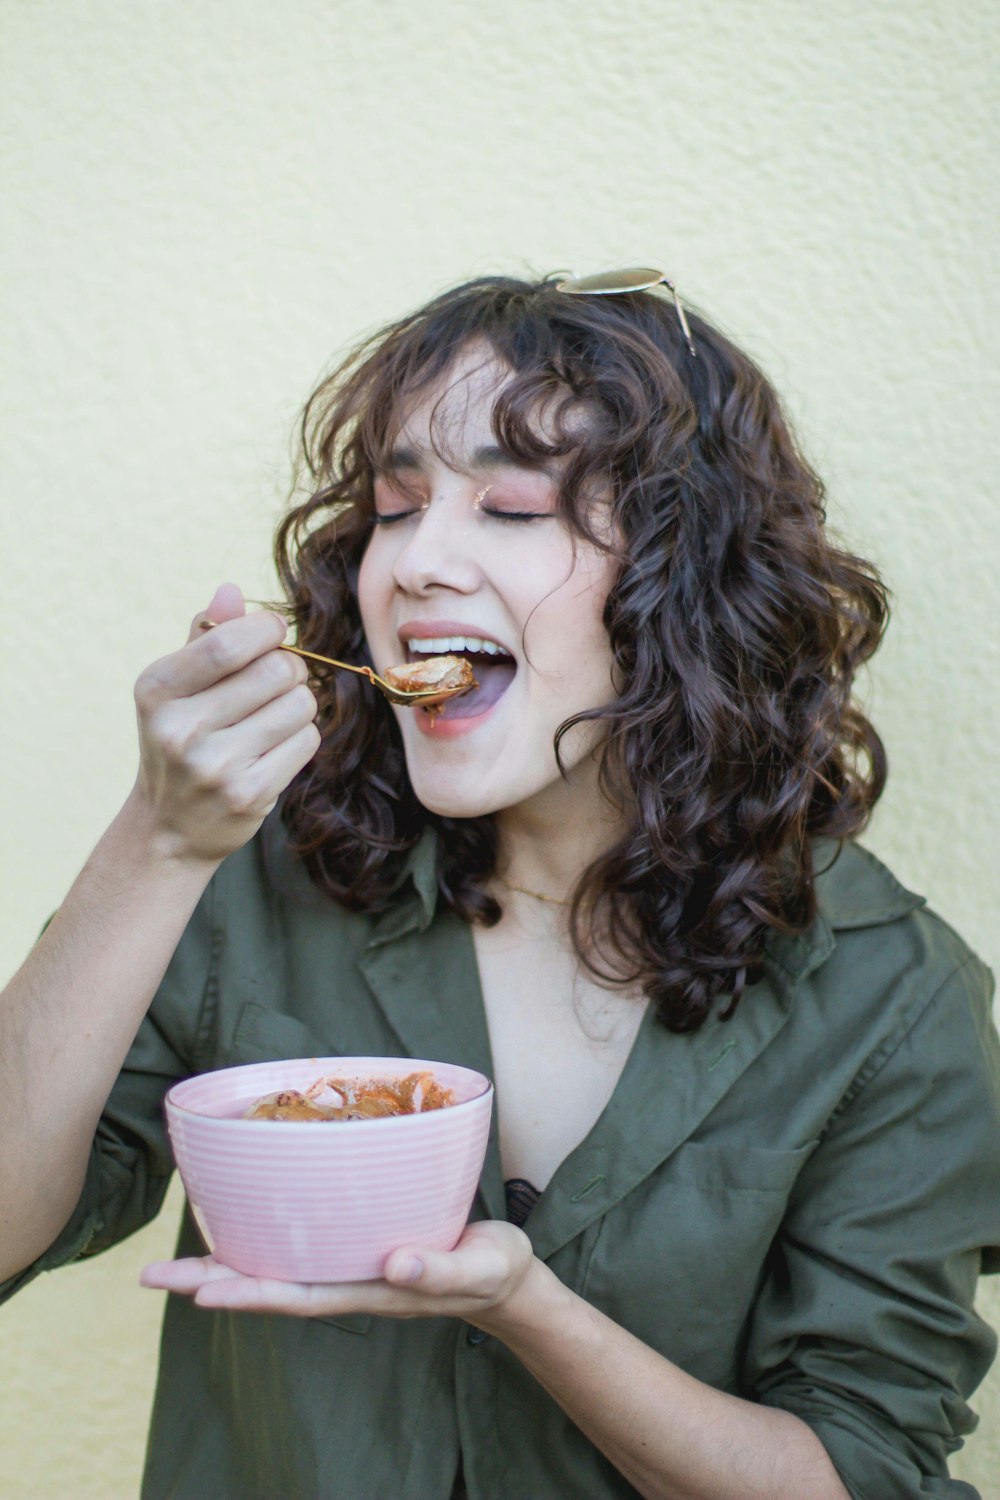 a woman eating food out of a pink bowl